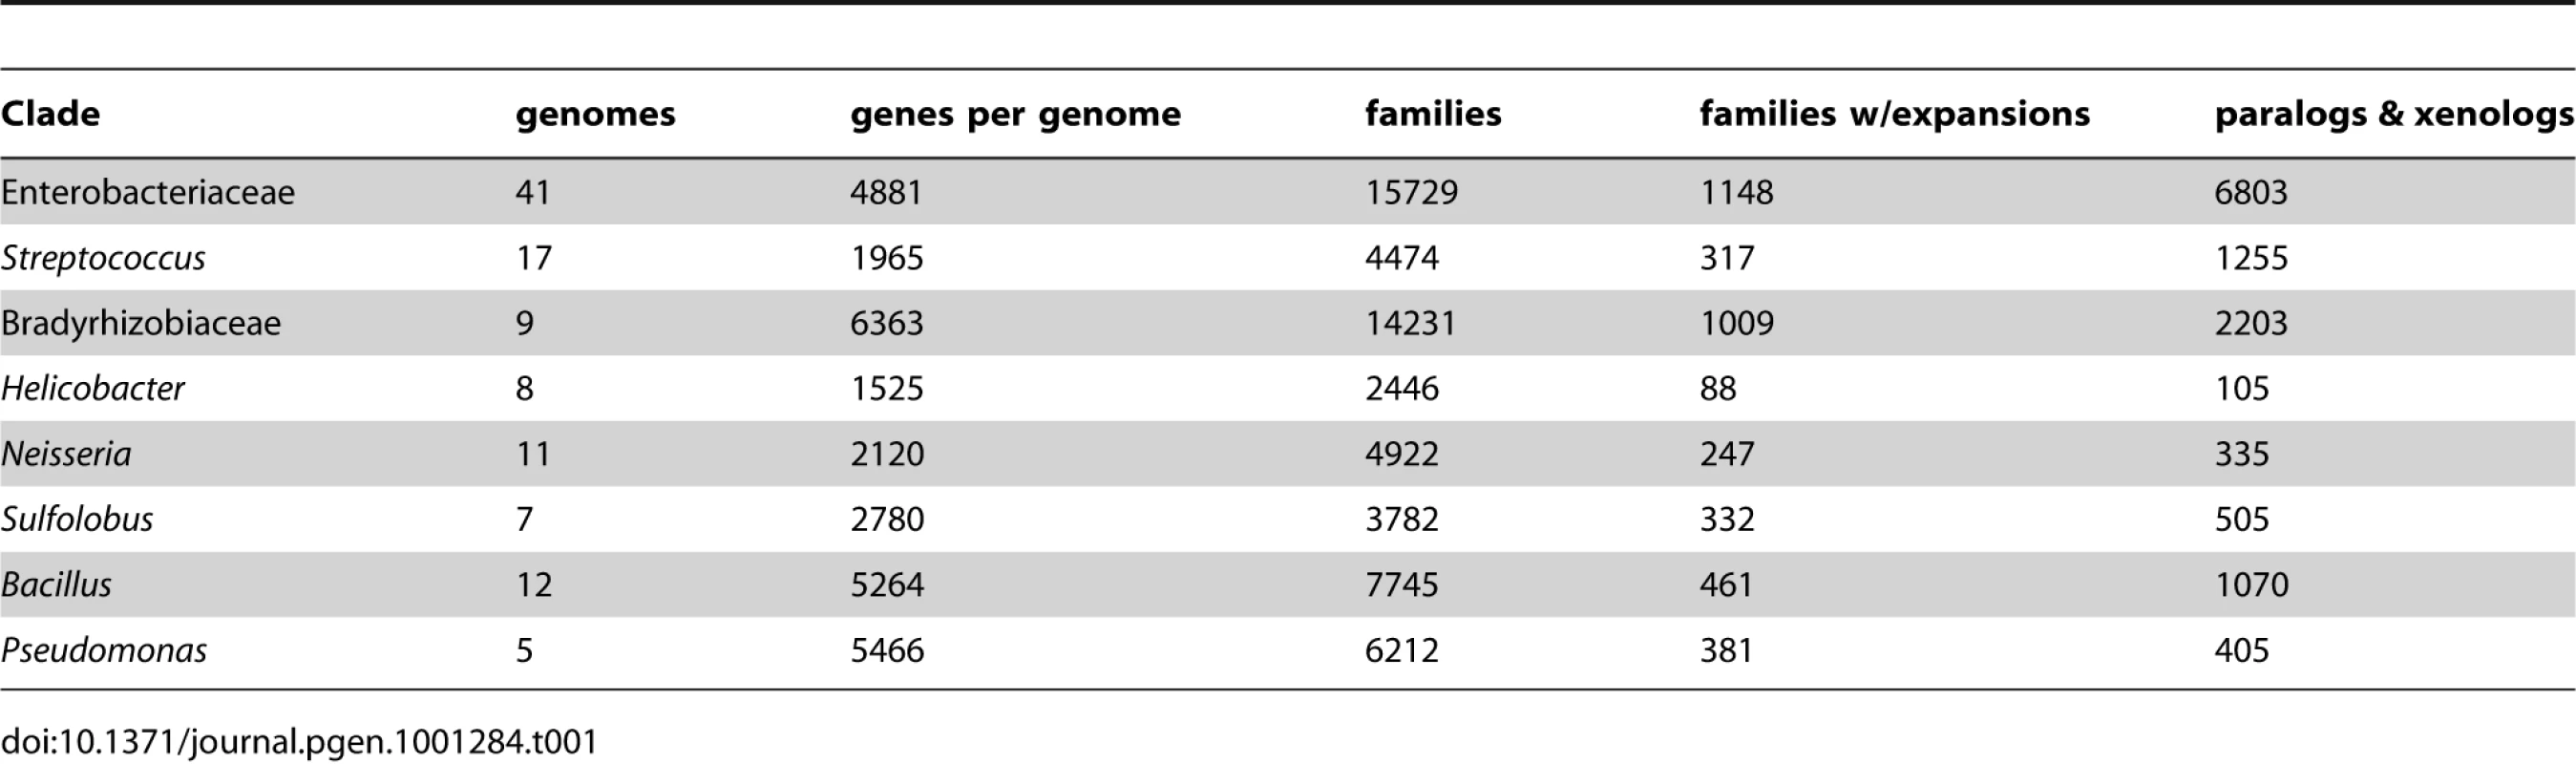 Expansions of gene families.